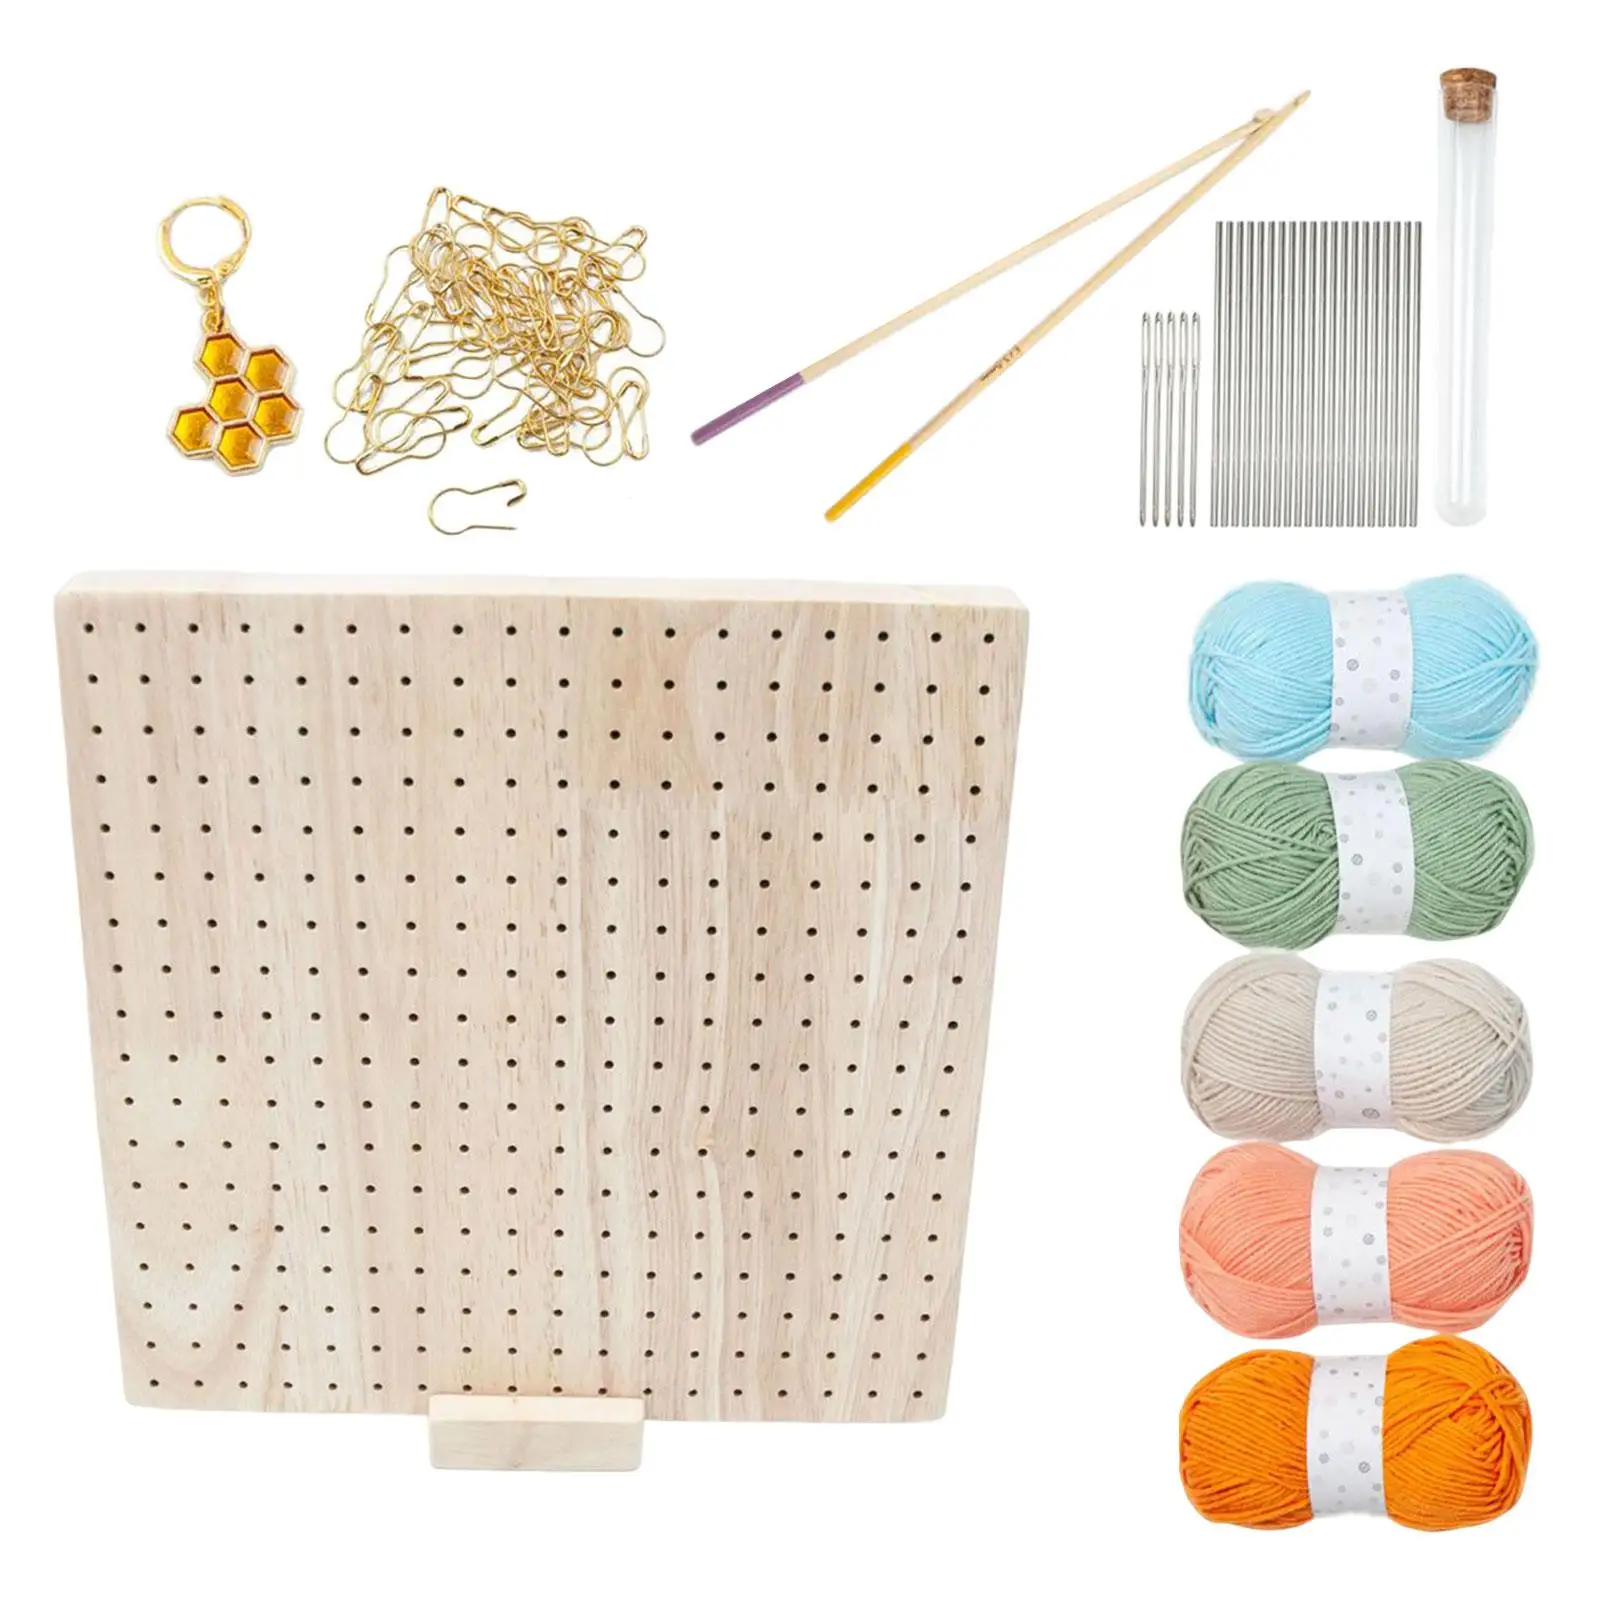 Blocking Board Set Handcrafted Knitting Solid Blocking Mats for Craft Weave Knitting Crochet Sewing Supplies Handy DIY Lovers